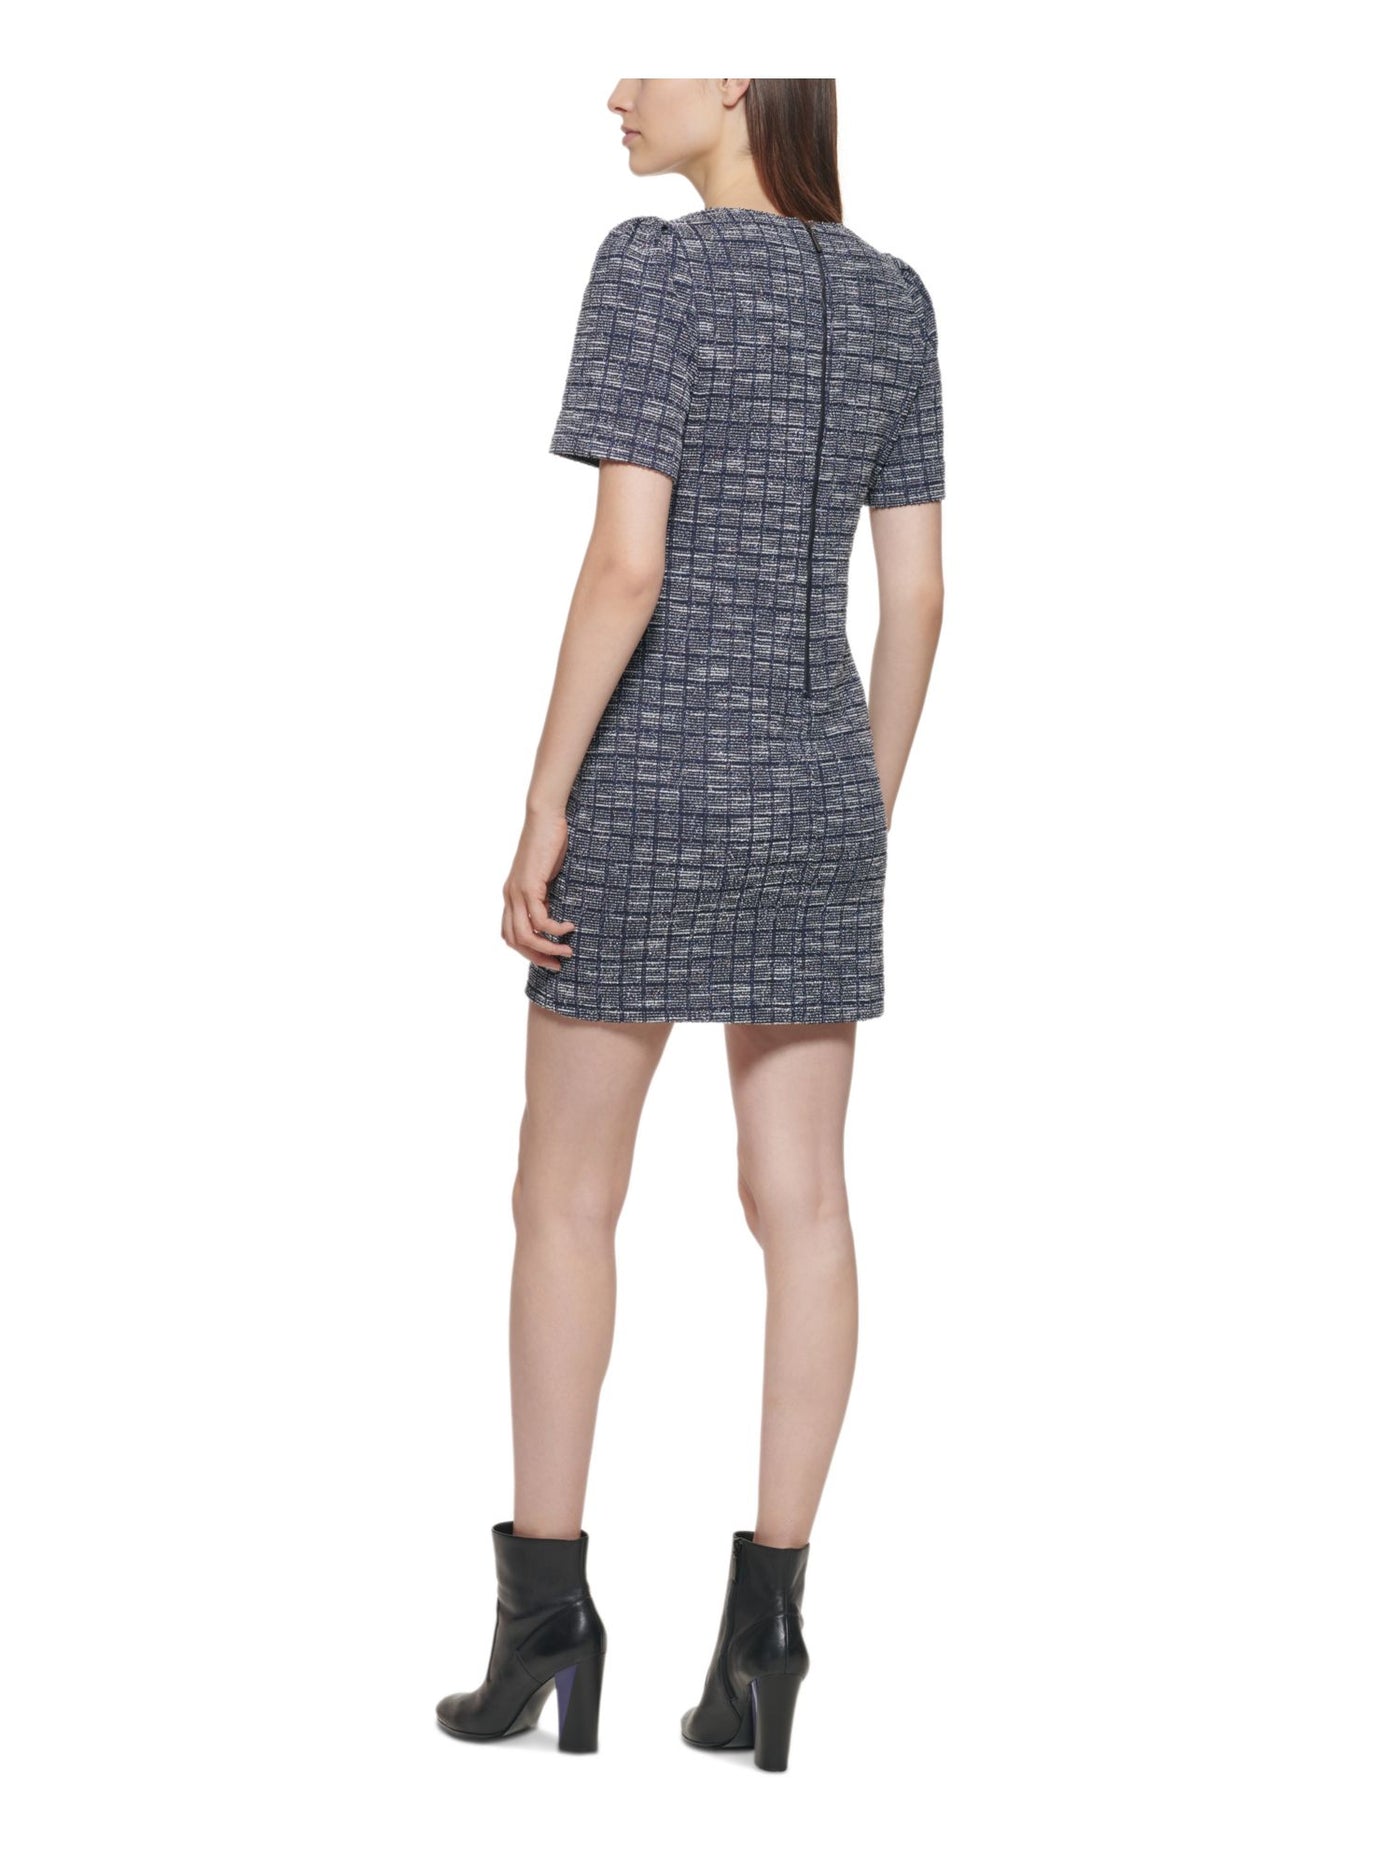 CALVIN KLEIN Womens Navy Zippered Unlined Tweed Short Sleeve Round Neck Above The Knee Party Sheath Dress 12